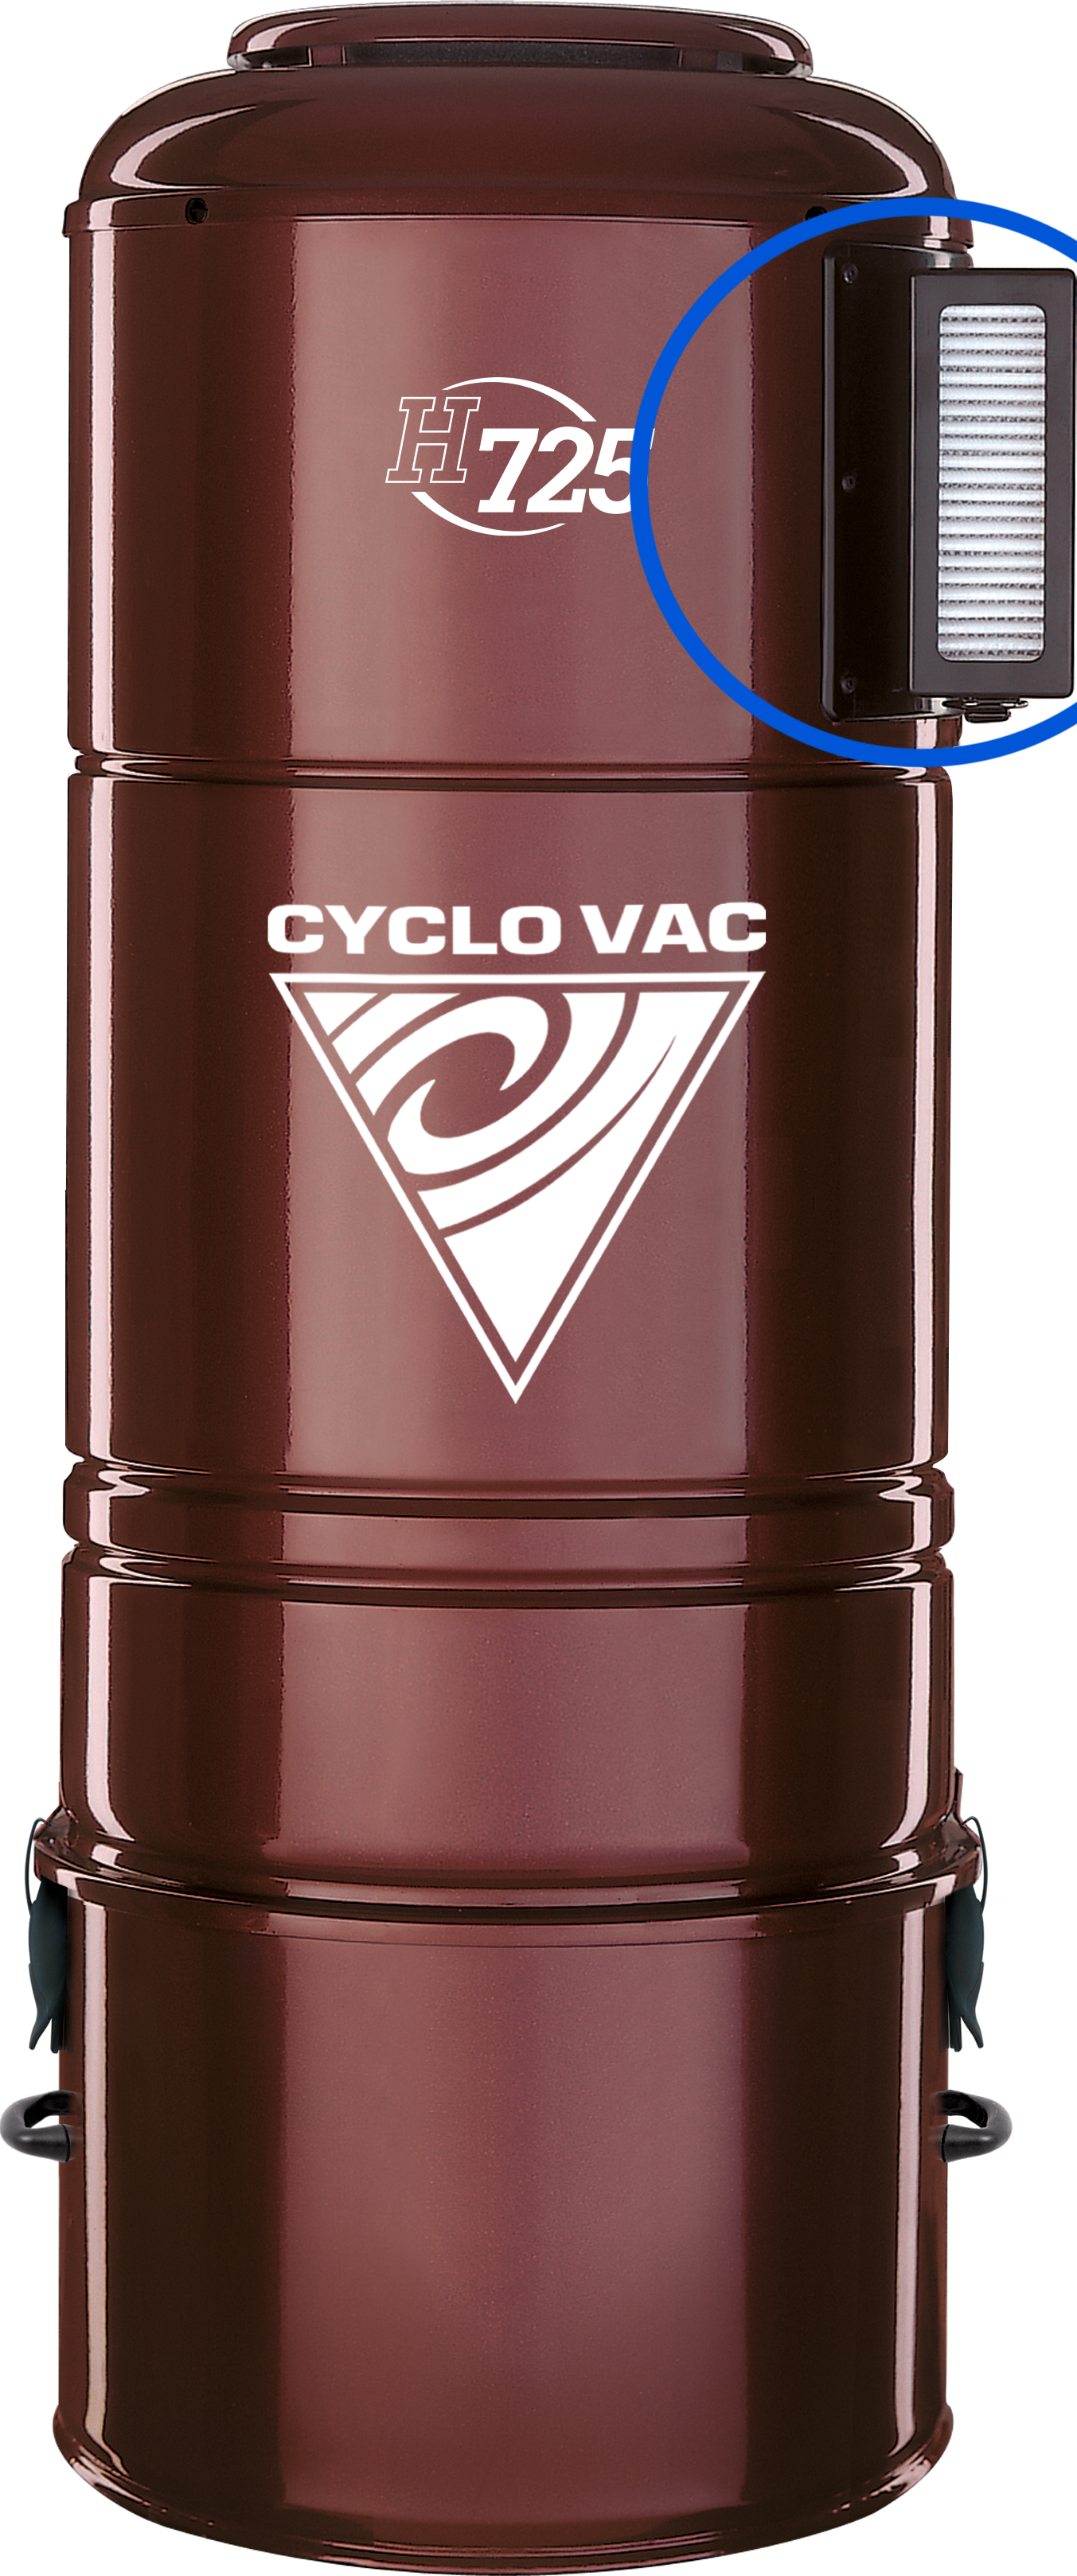 Mvac and Cyclovac Carbon Filters